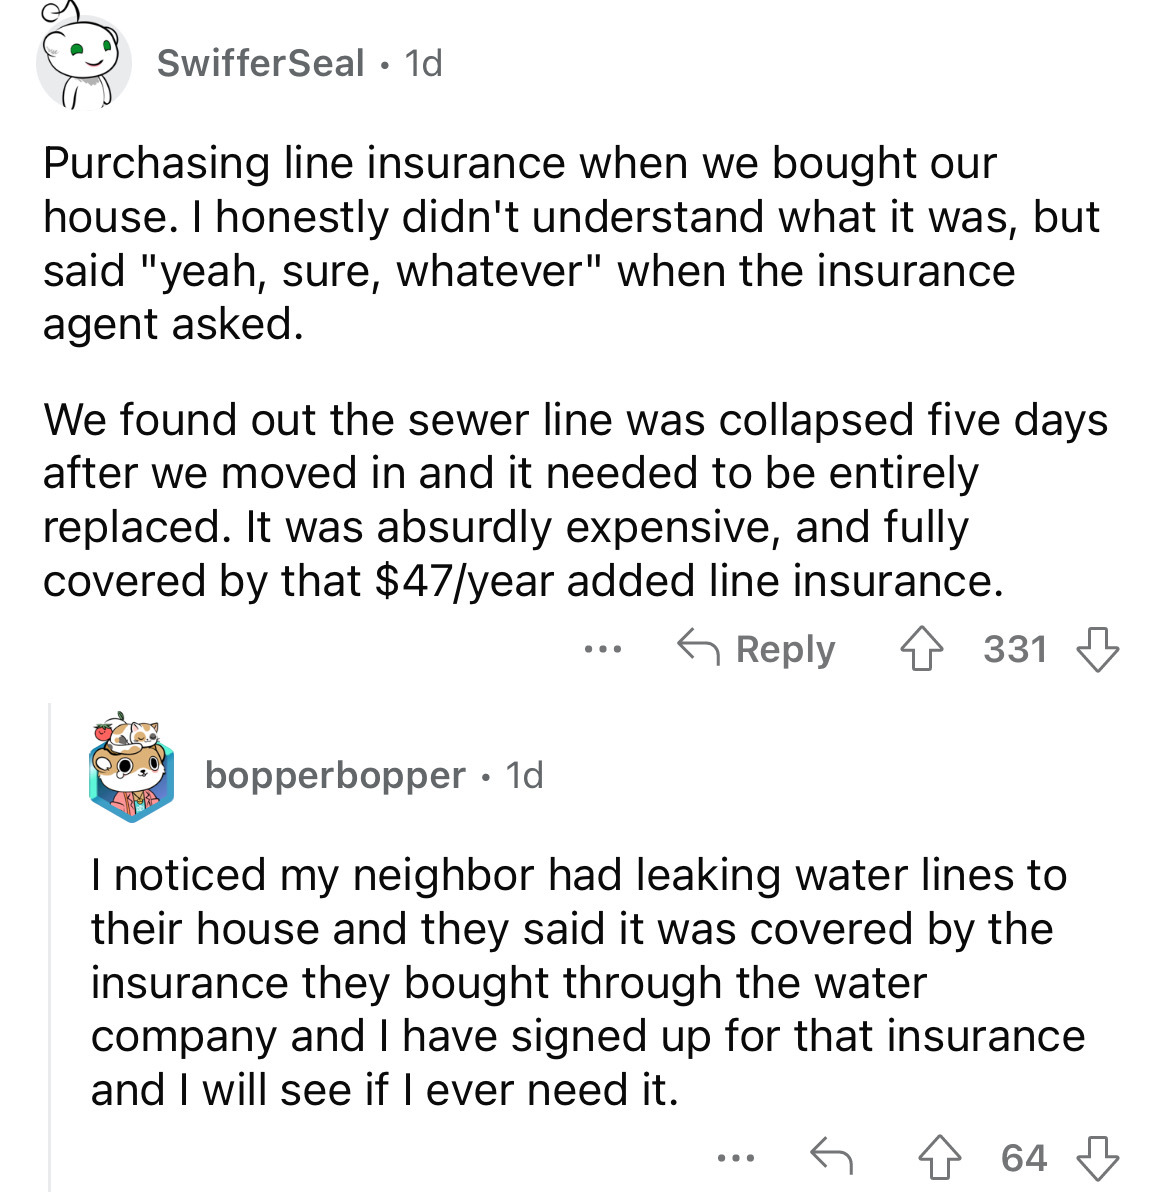 angle - SwifferSeal 1d Purchasing line insurance when we bought our house. I honestly didn't understand what it was, but said "yeah, sure, whatever" when the insurance agent asked. We found out the sewer line was collapsed five days after we moved in and 